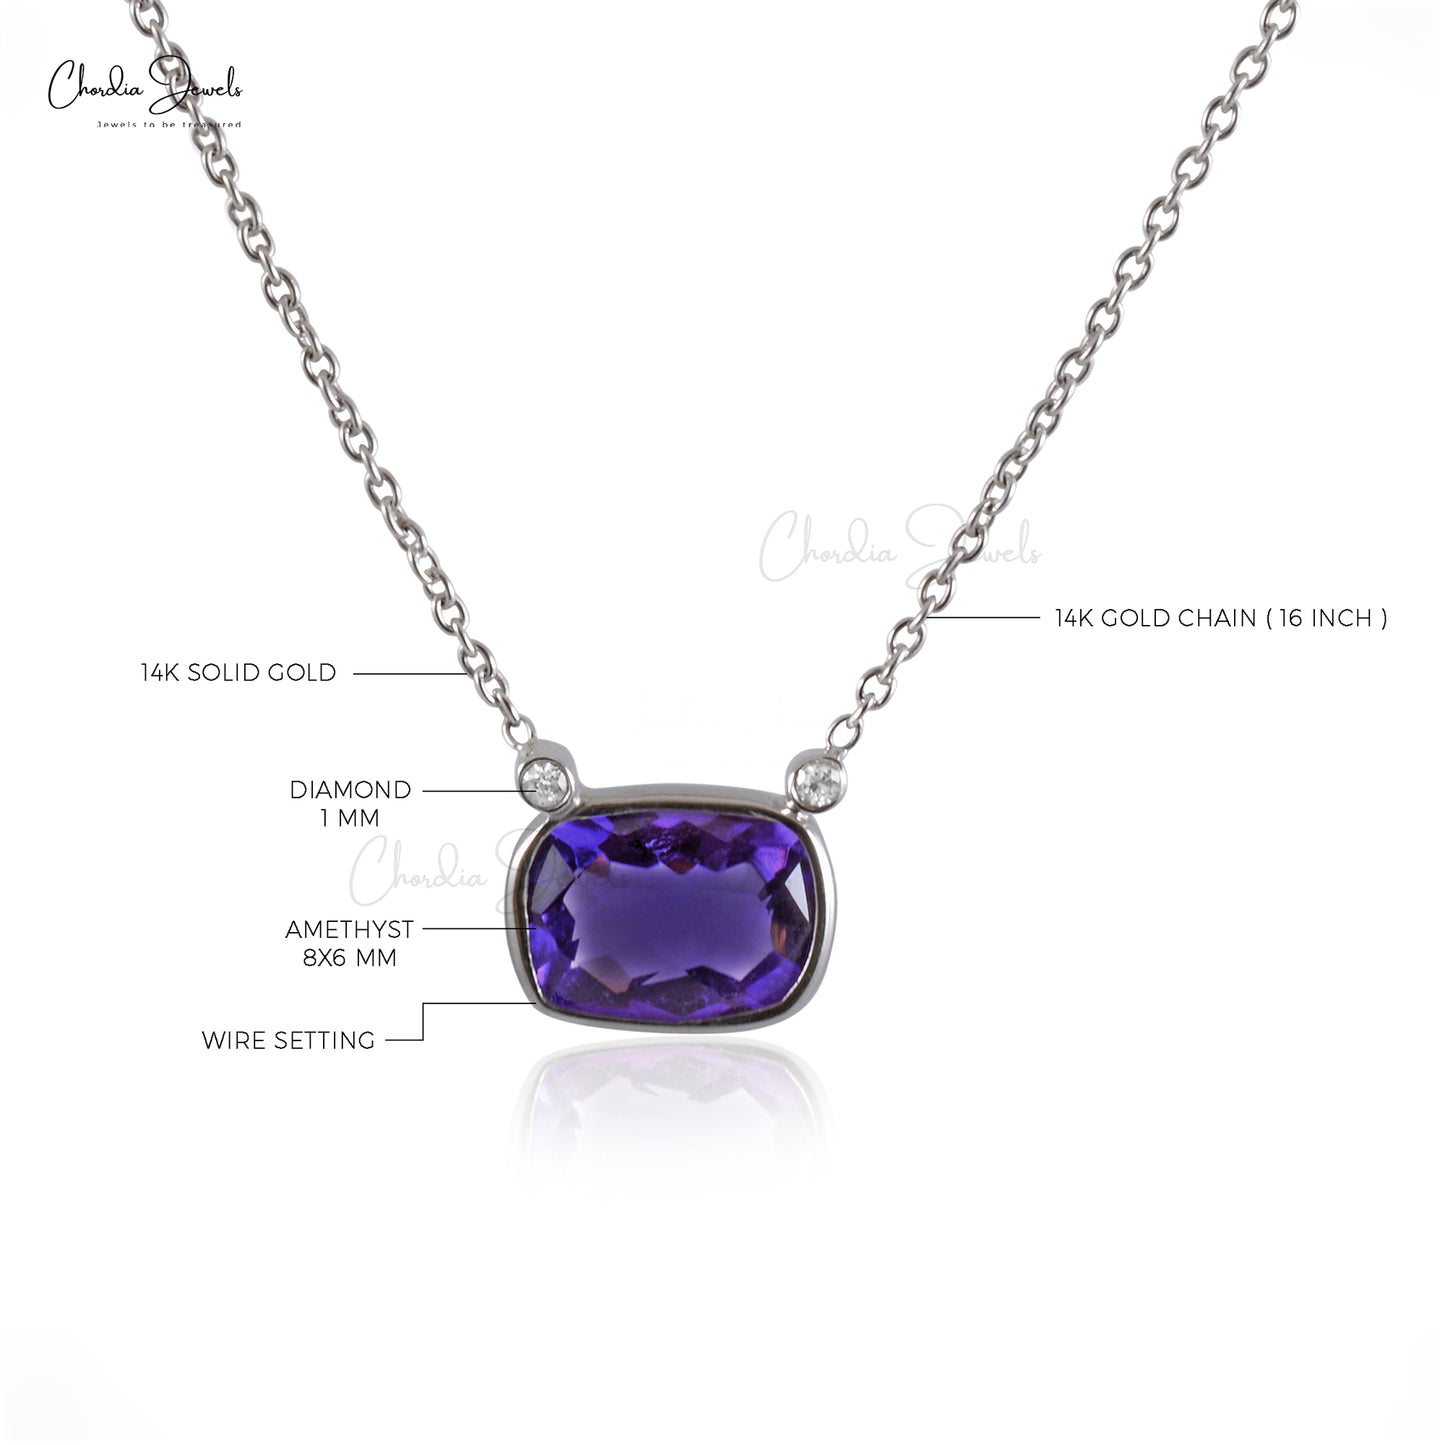 Load image into Gallery viewer, Natural Amethyst and Diamond Necklace in 14k Solid White Gold 8x6mm Recta Cushion Cut Gemstone Bezel Necklace
